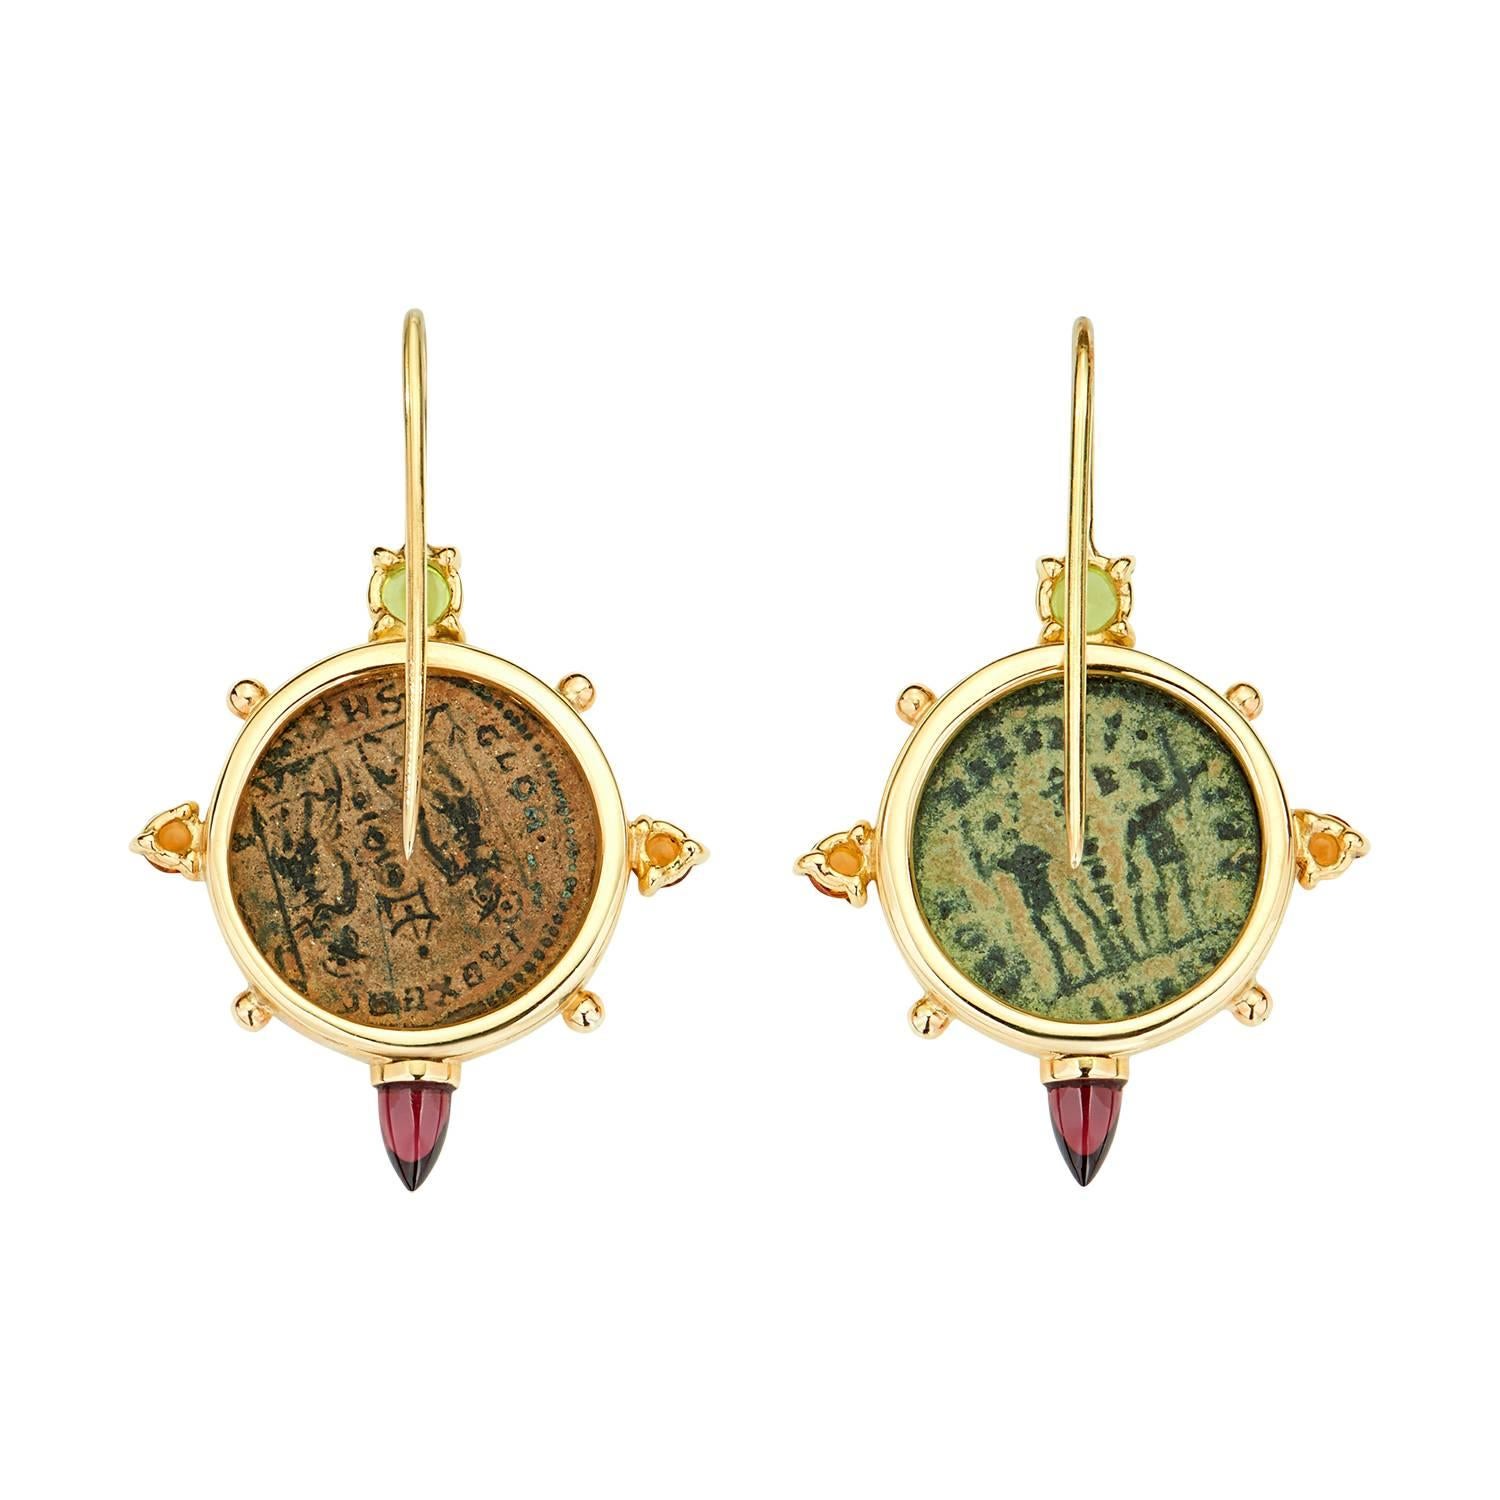 These Dubini coin earrings from the 'Empires' collection feature authentic Roman Imperial bronze coins set in 18K yellow gold with peridot, citrine and rhodolite.

* Due to the unique process of hand carving coins in ancient times, there may be a